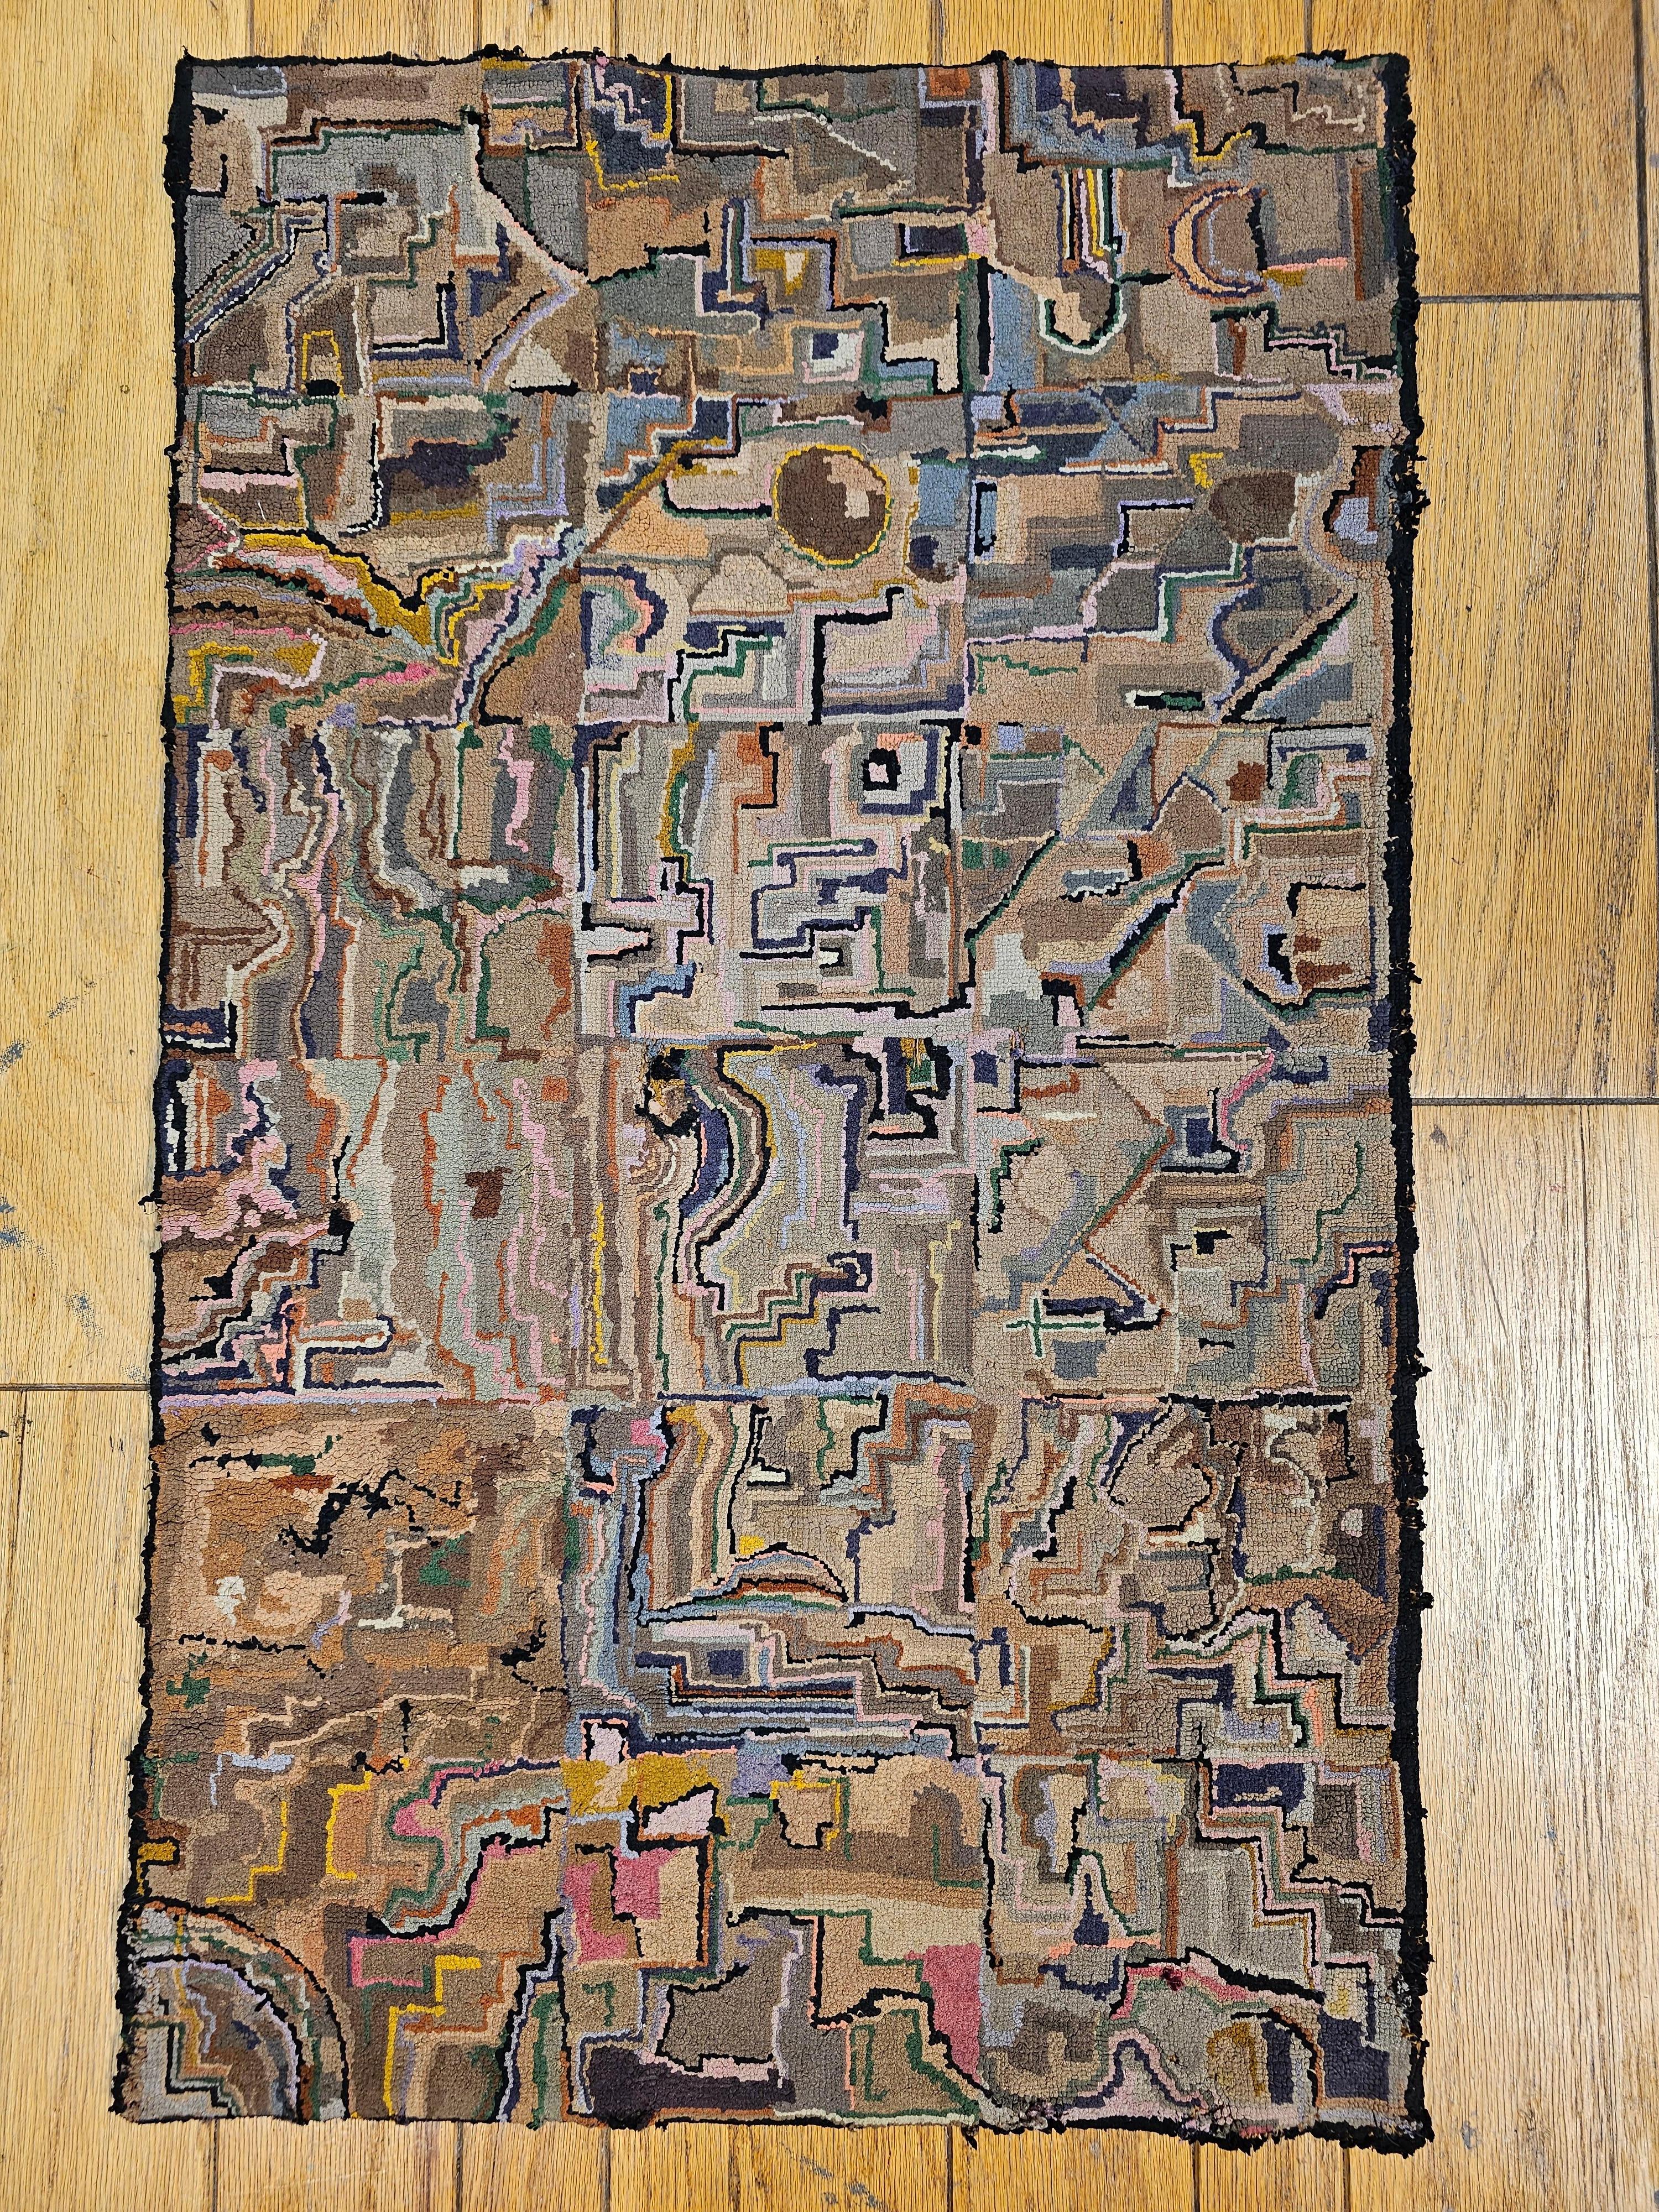 19th Century hand hooked rug in a free form design,  We are intrigued with the novelty and the imagination of the maker in creating such a wonderful and rare design in earth tone colors.  The  hooked rugs from the late 19th and early 20th centuries